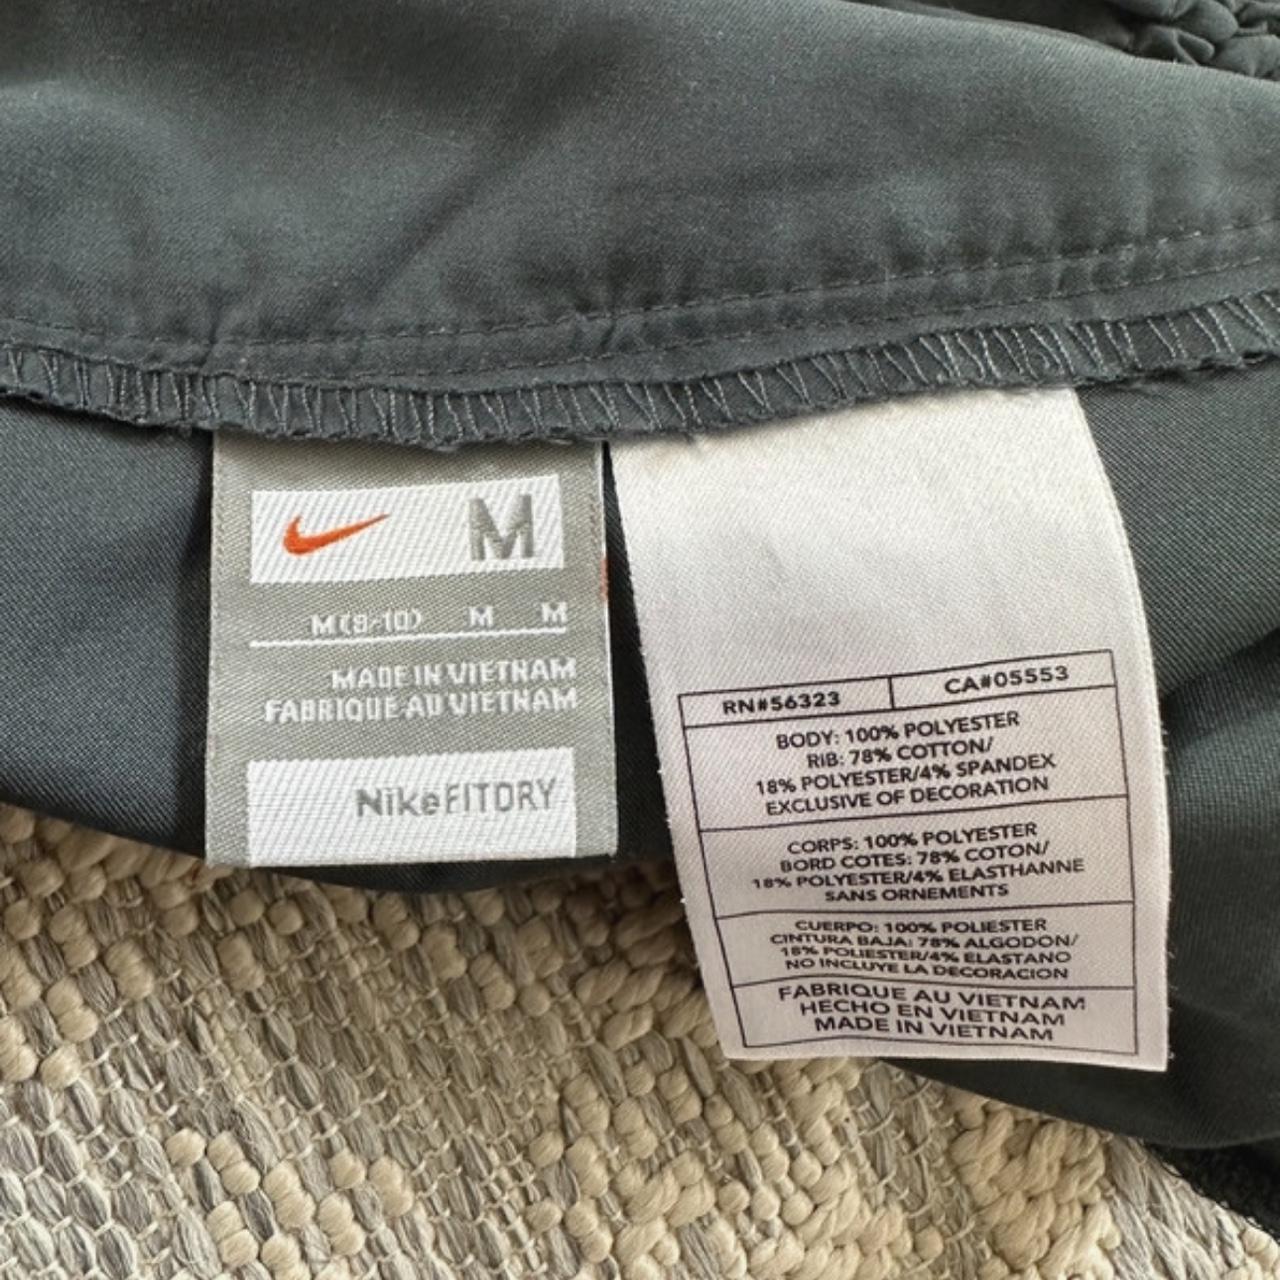 Nike tennis skirt size M - had to tie at the back... - Depop